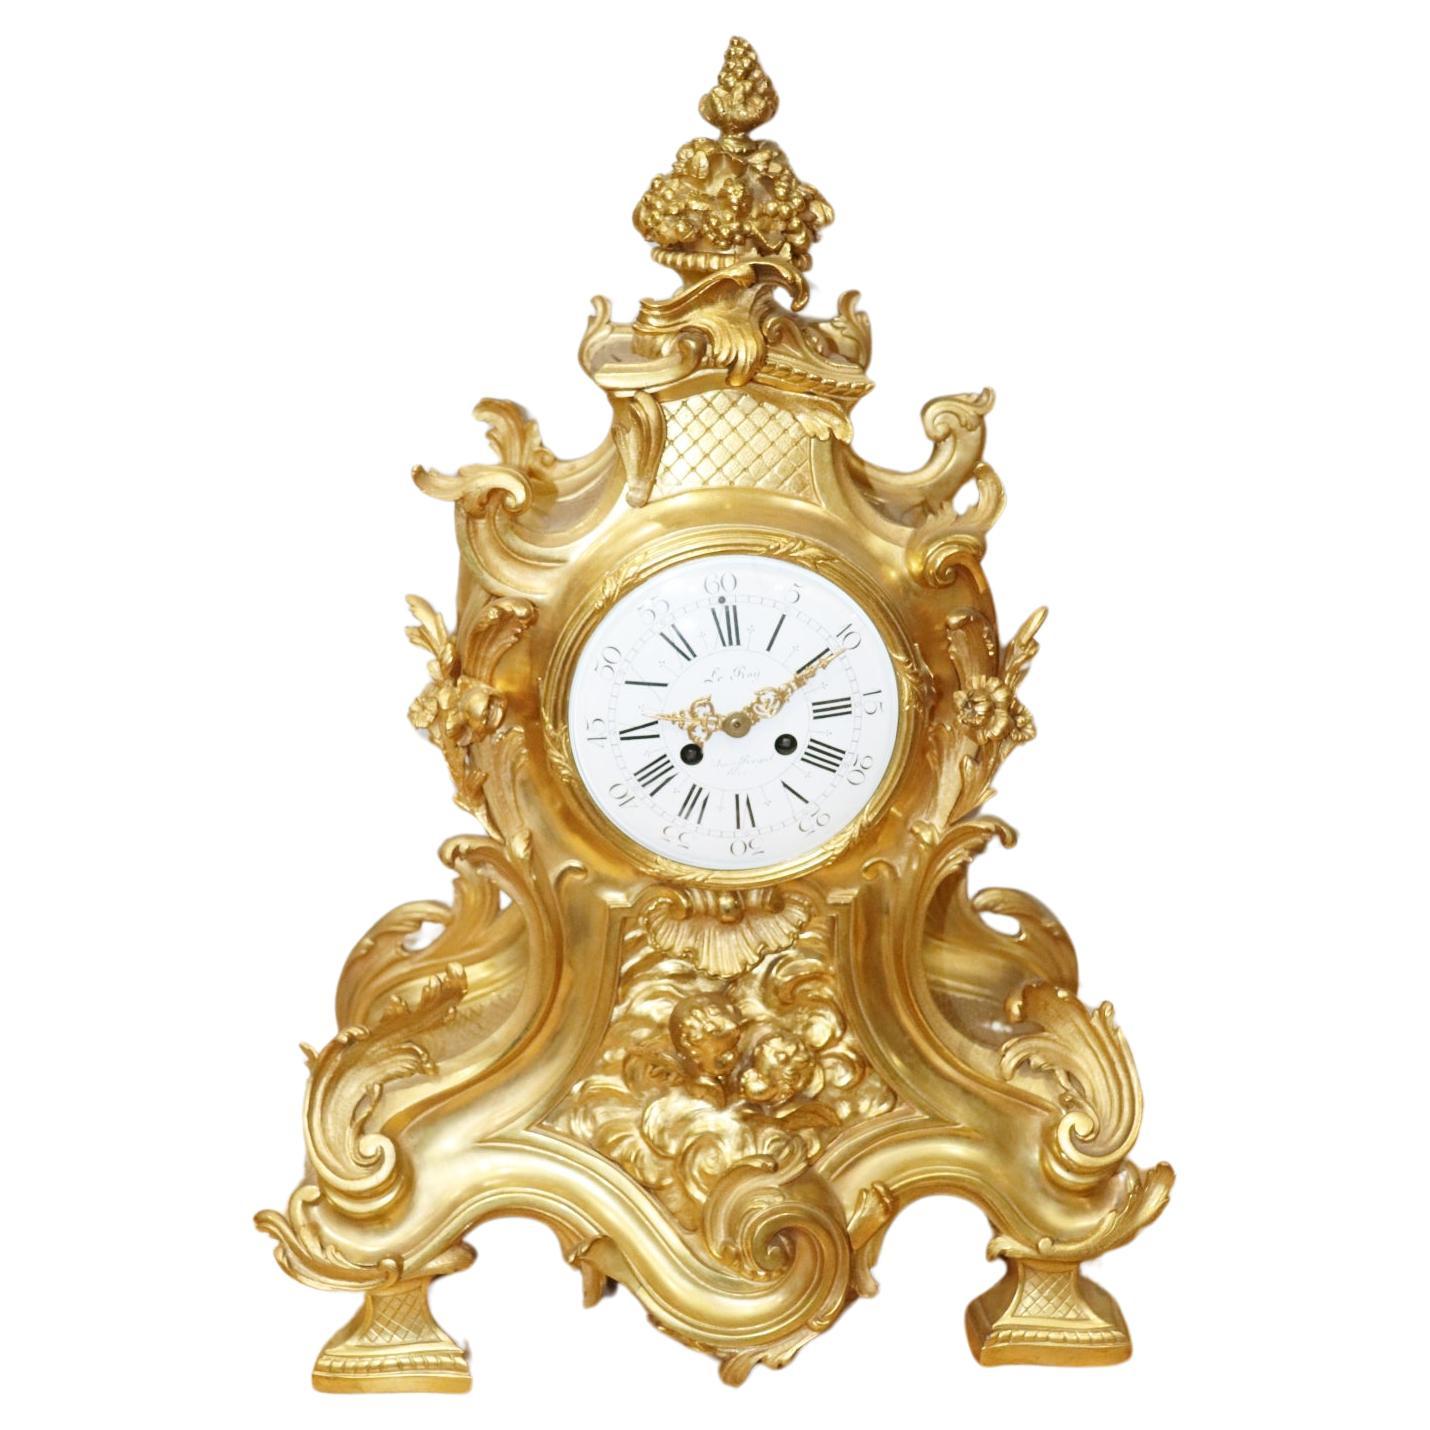 Superb Bronze High Quality Signed leRoy French Rococo Louis XV Mantle Clock For Sale